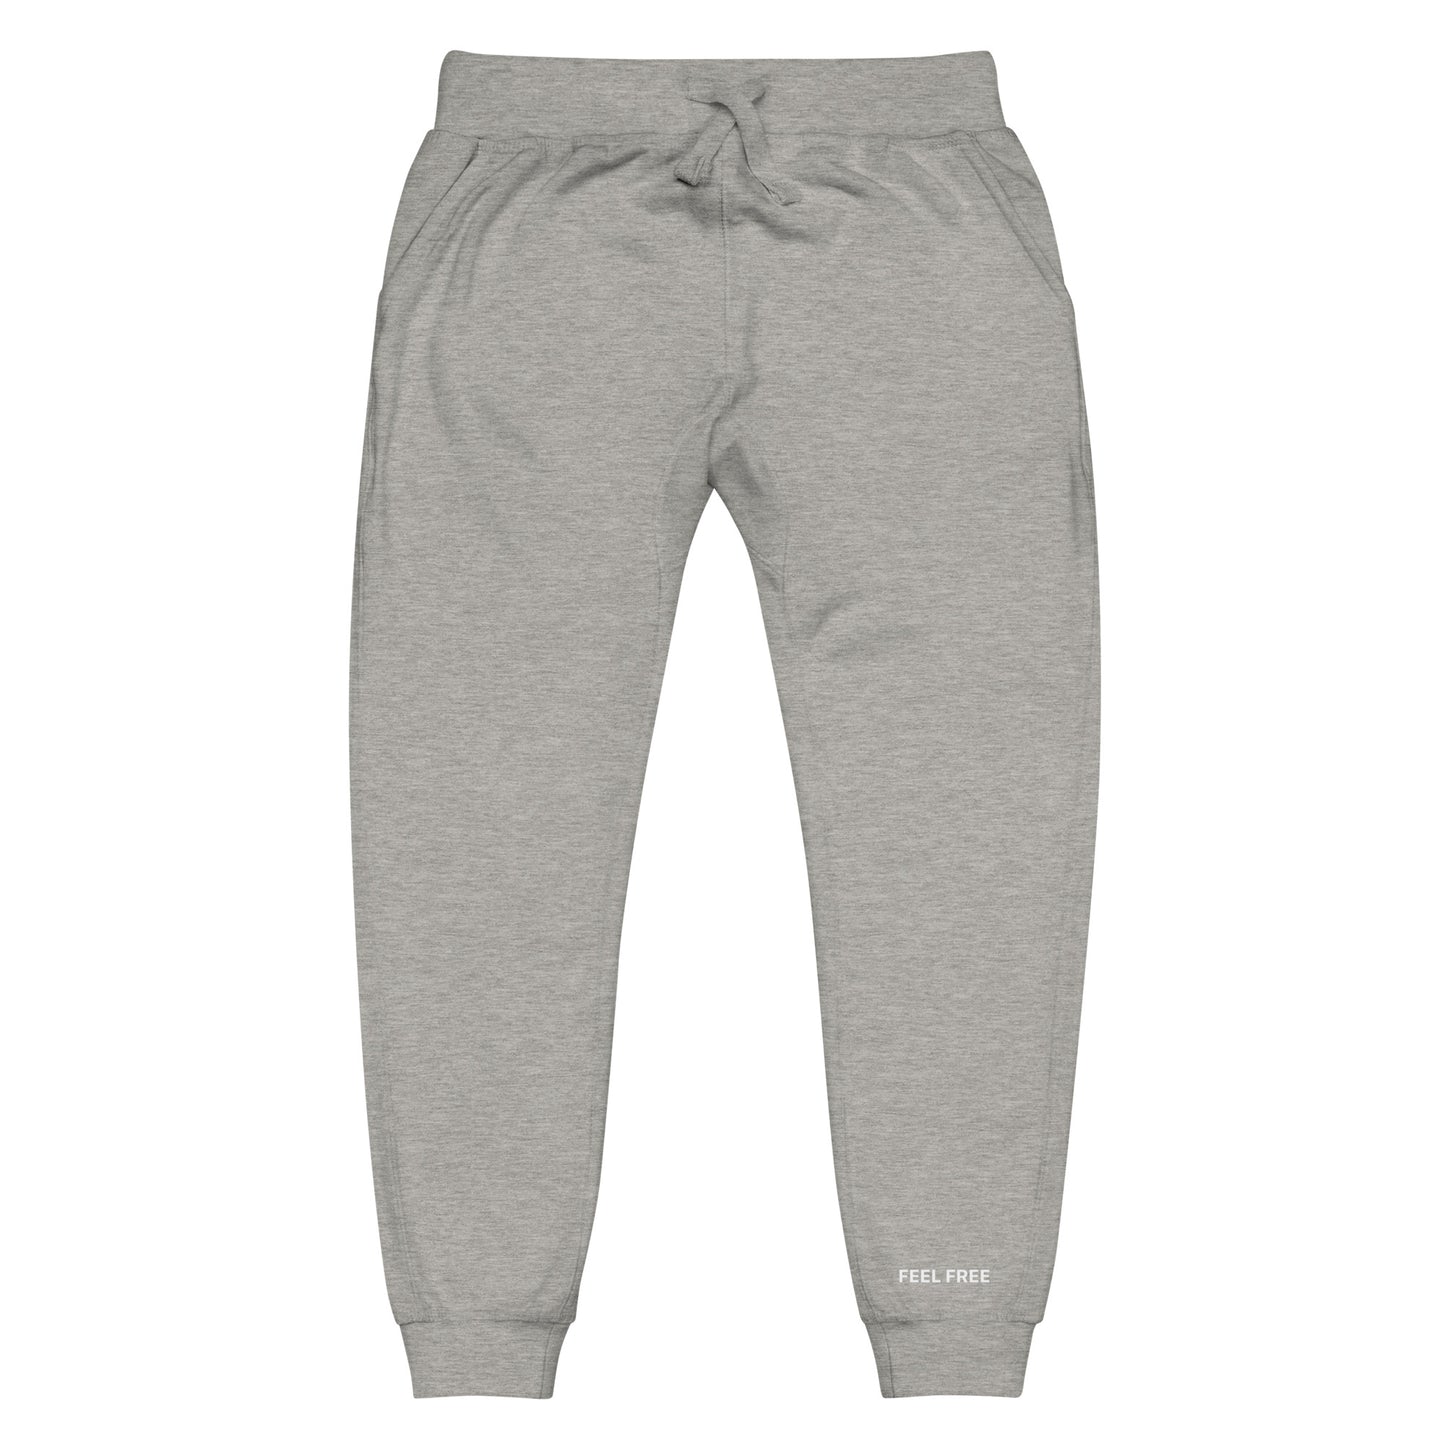 The Colored collection sweatpants